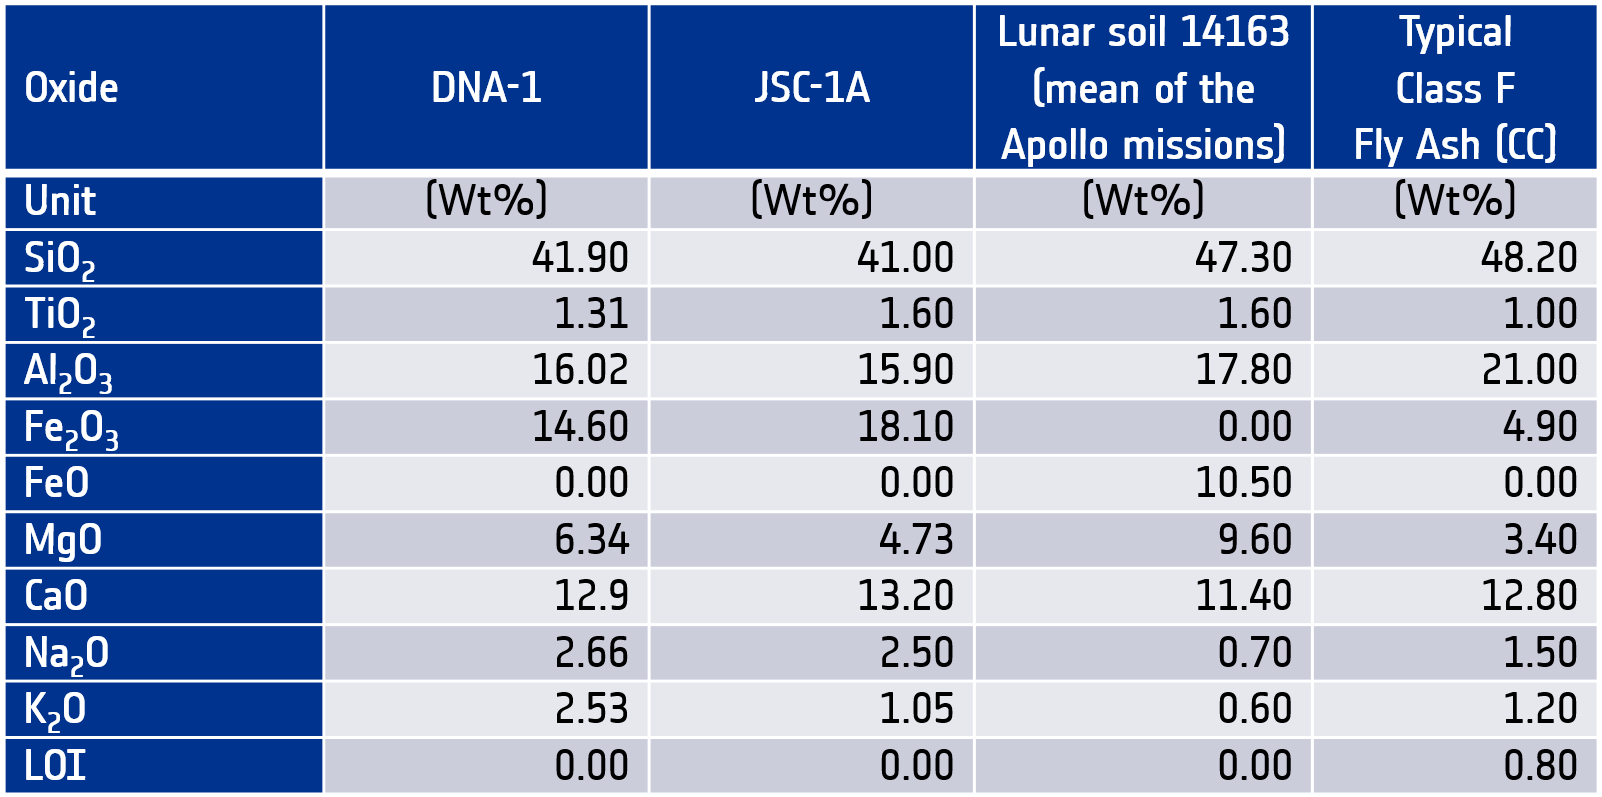 Table 1: Main oxides in DNA-1, JSC-1A, lunar soil samples from Apollo missions and typical Class F fly ash (Haskin and Warren, 1991), (Aughenbaugh et al., 2016).